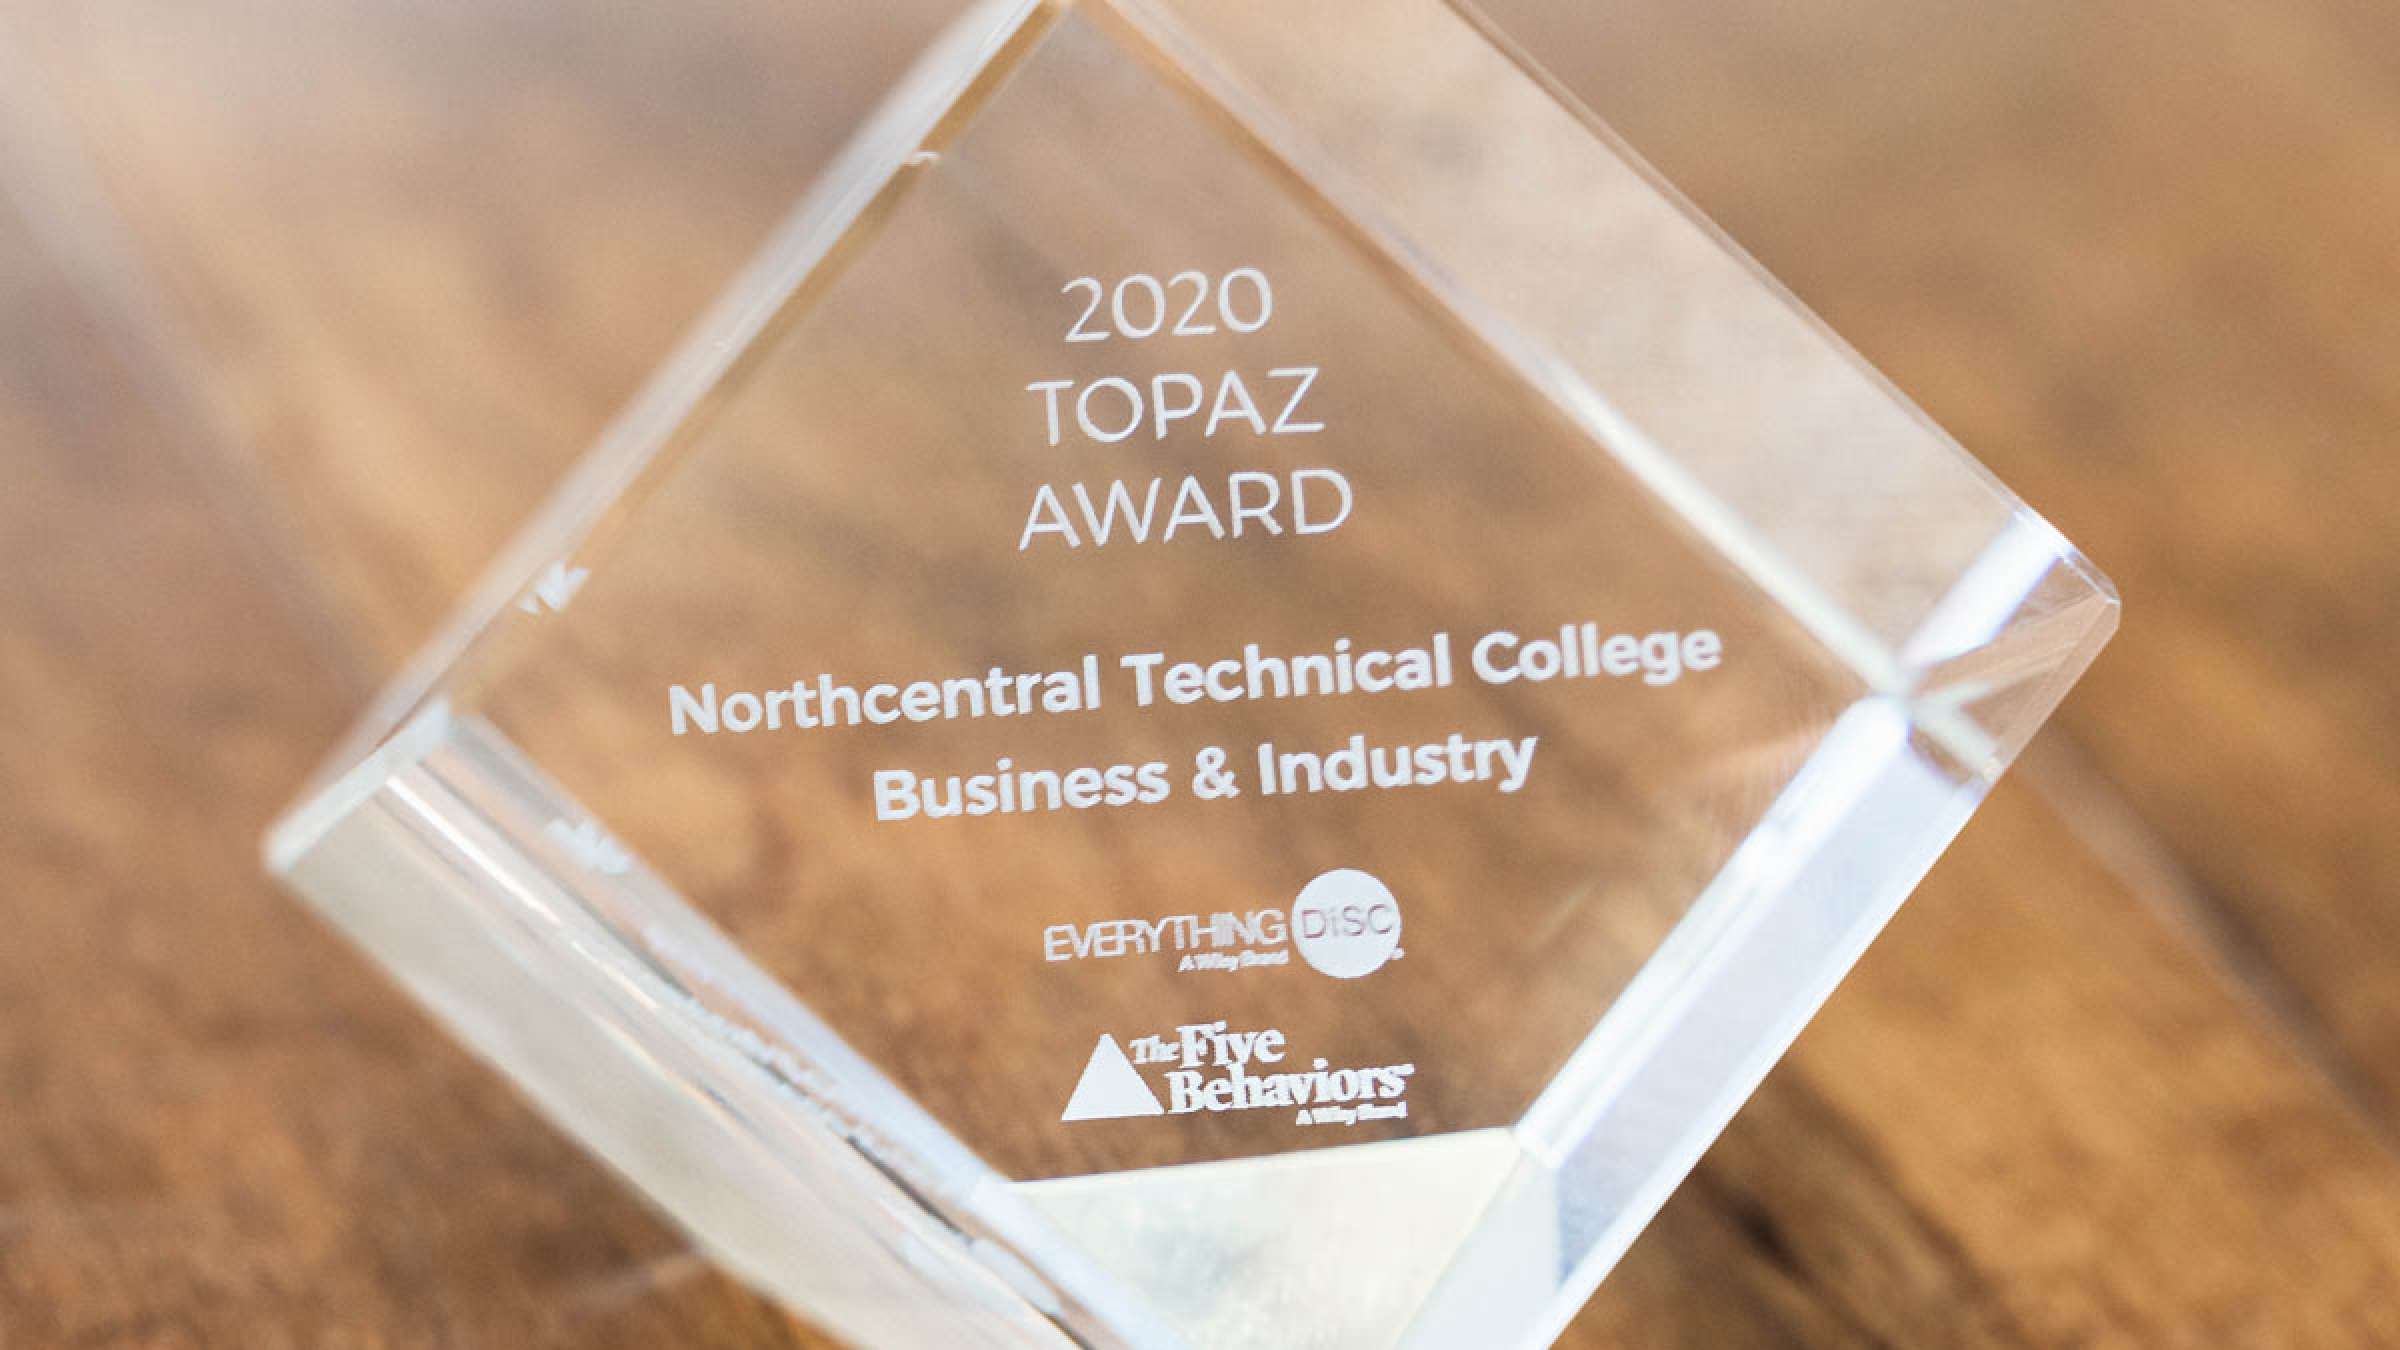 Ntc Receives Award For Training Area Businesses To Succeed In Sales Northcentral Technical College